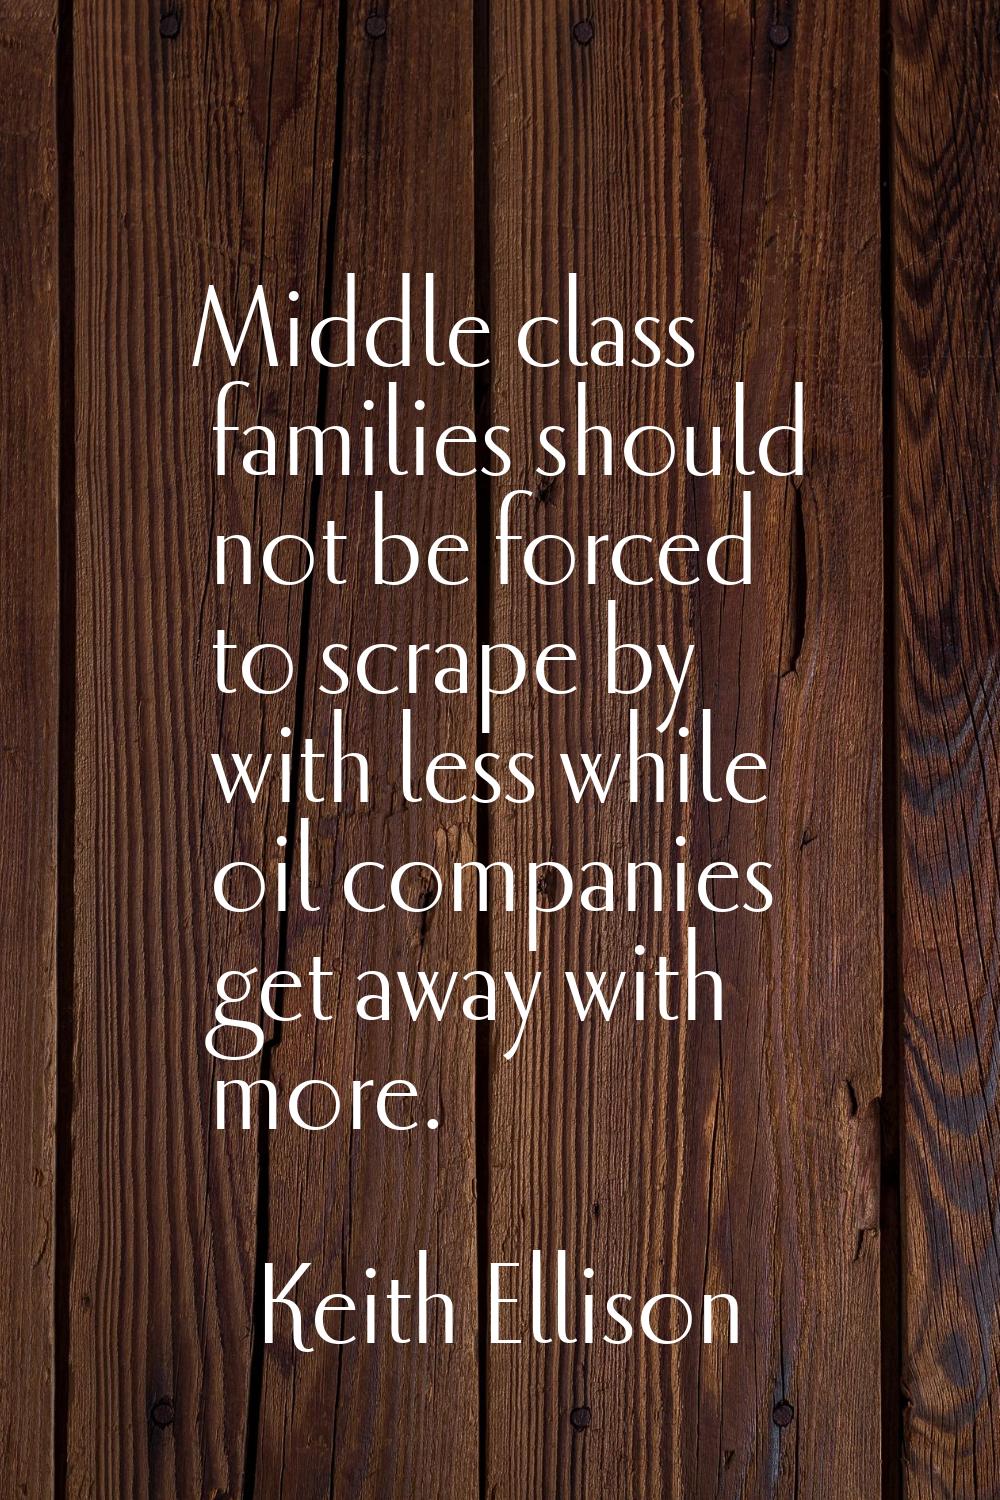 Middle class families should not be forced to scrape by with less while oil companies get away with